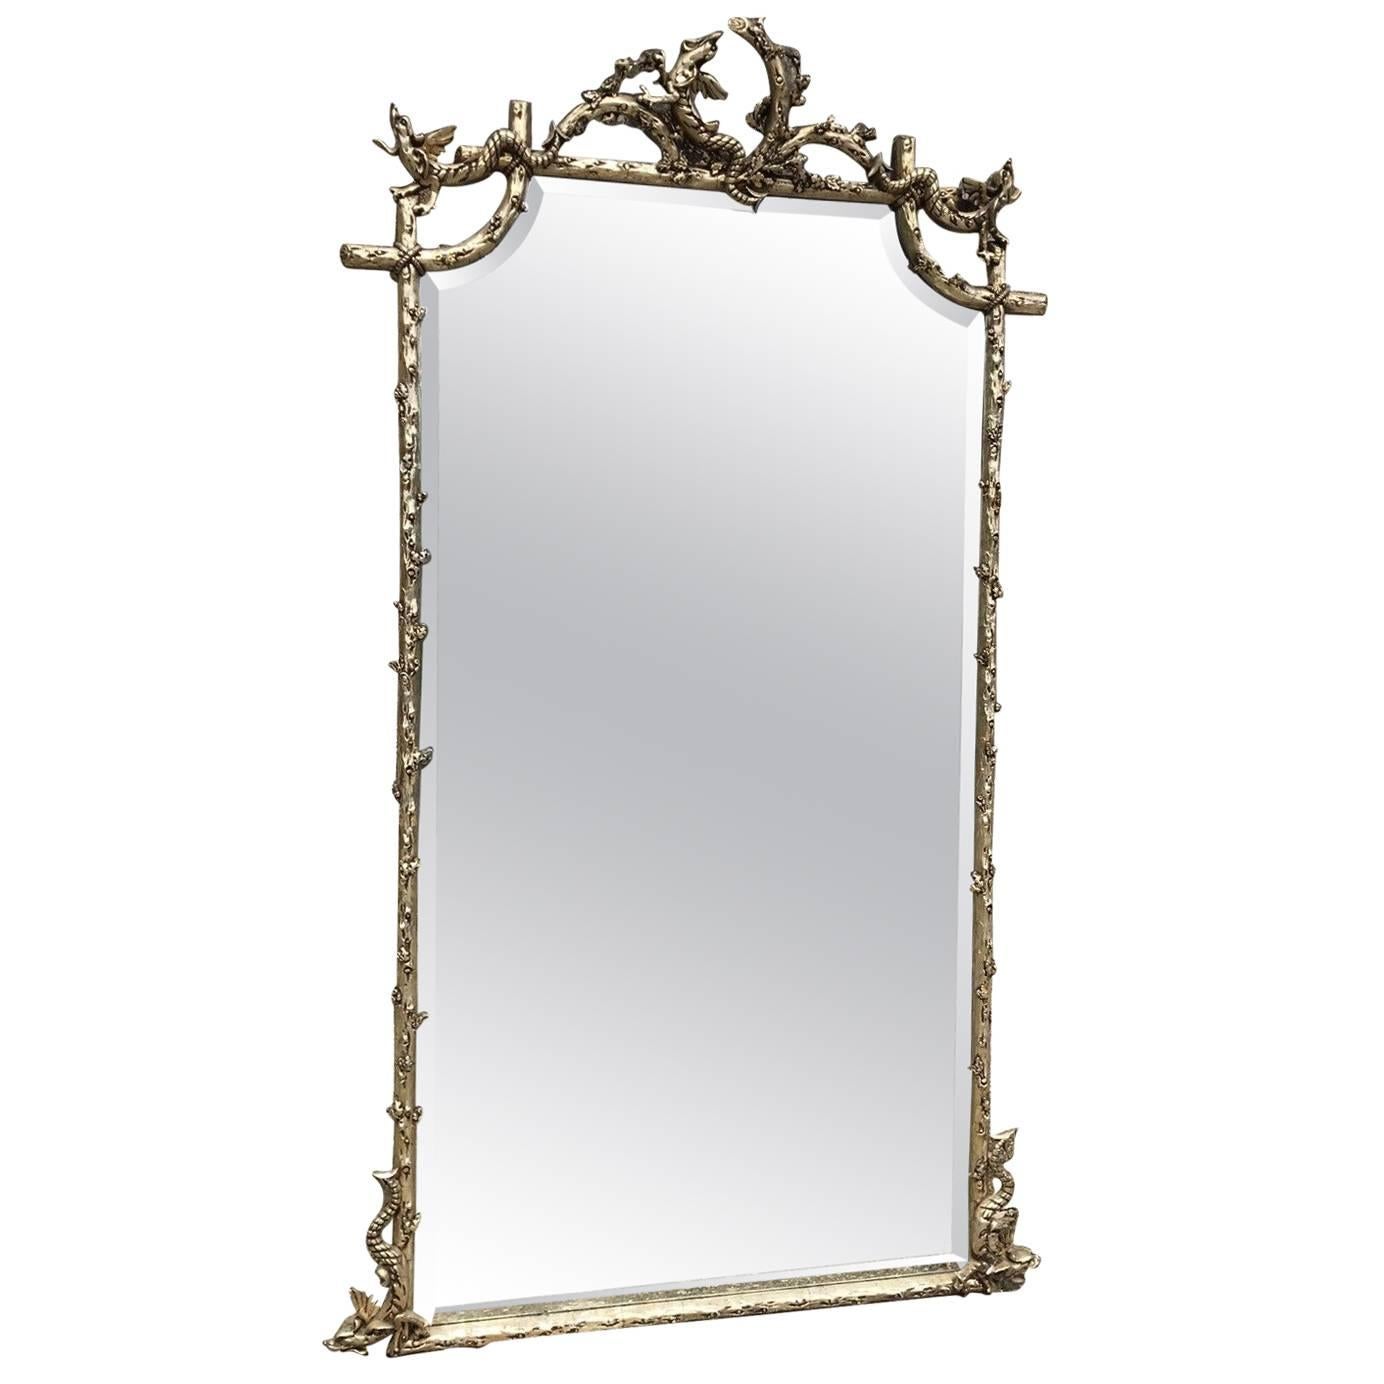 Stunning Rare French Antique Silver Mirror, Original Early 1800s, Vintage For Sale